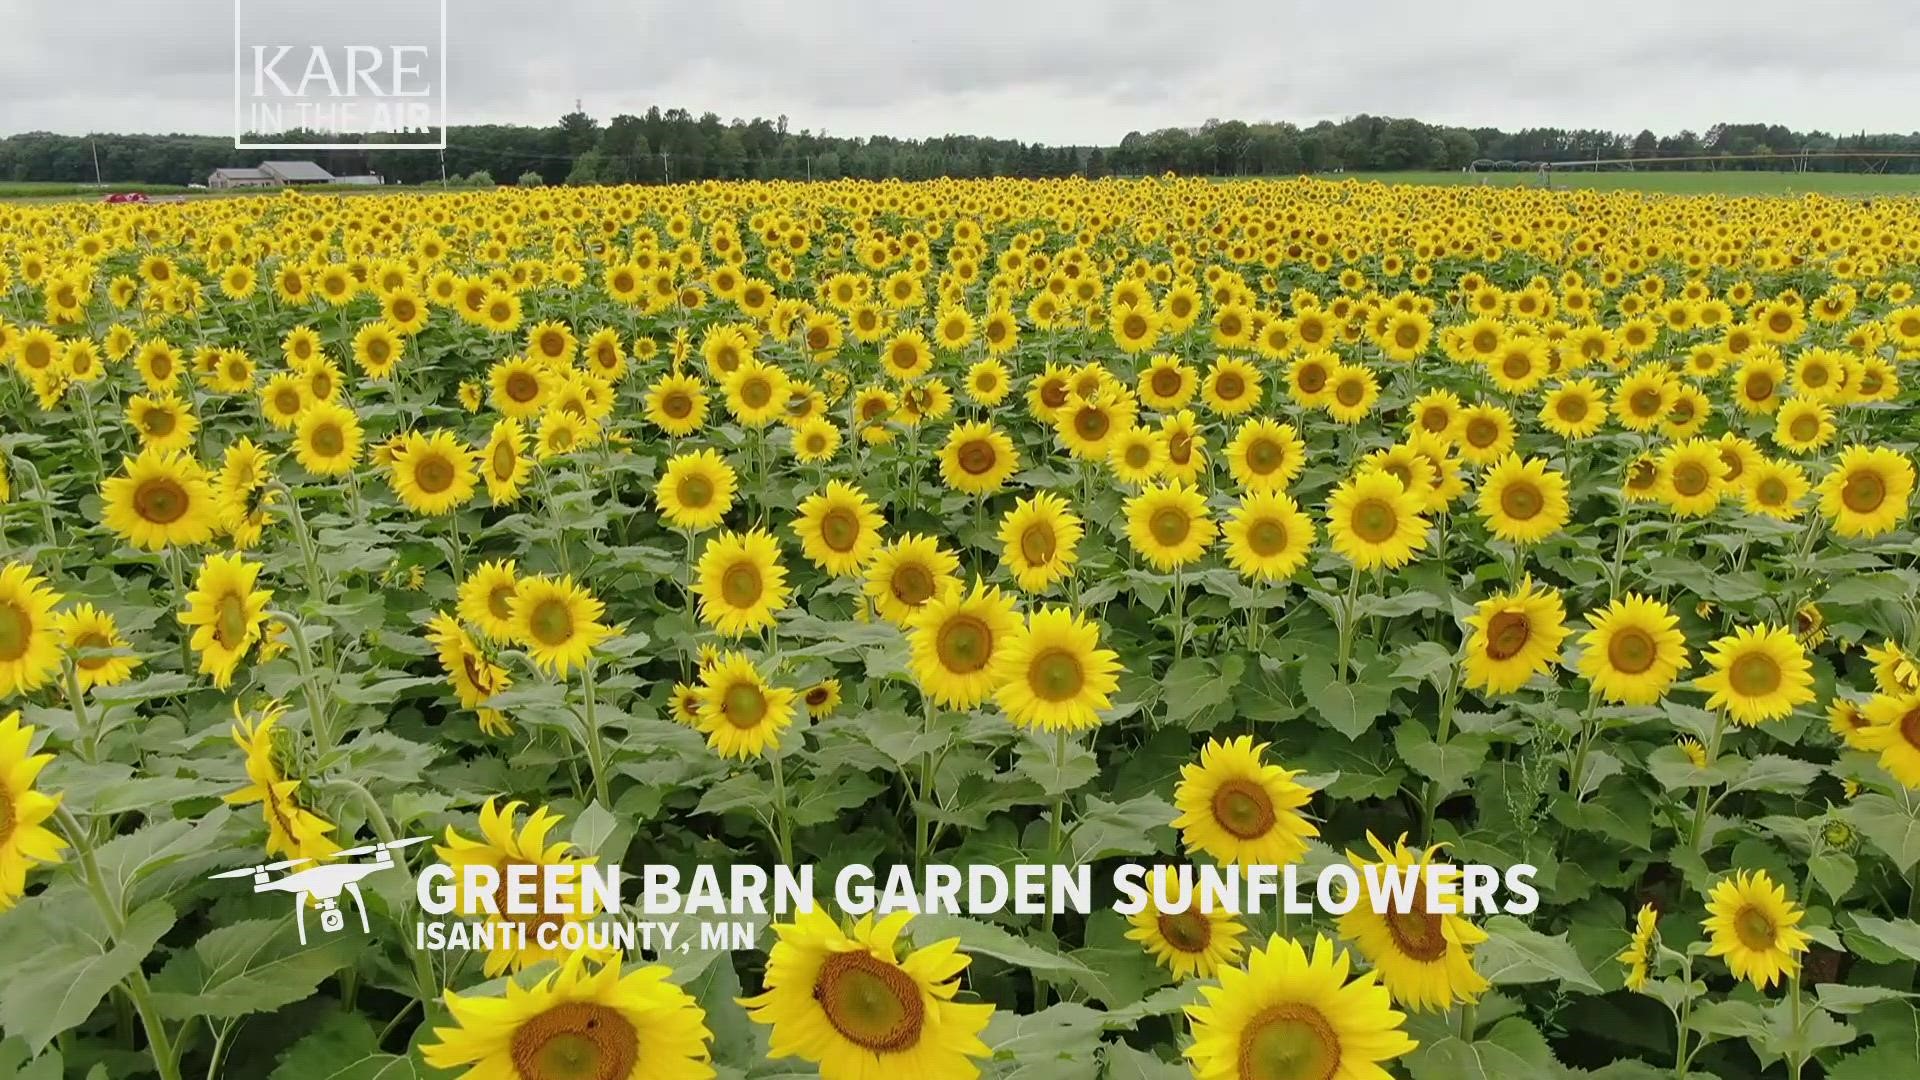 For the next few days an Isanti County  garden center is Minnesota's epicenter for sunflowers, attracting visitors to walk a circle trail and soak in the beauty.